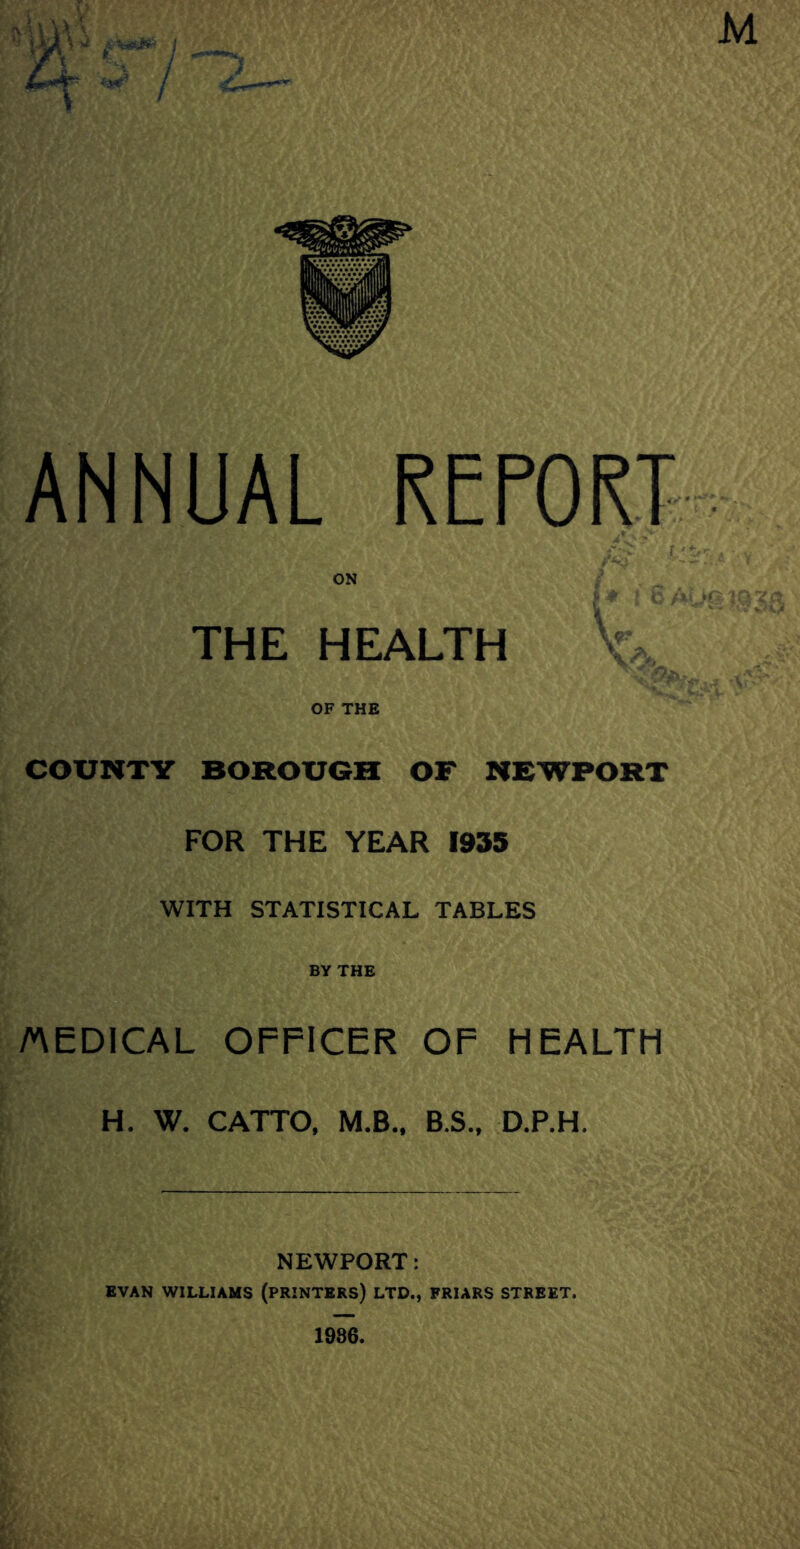 M ANNUAL REPORT ON THE HEALTH OF THE COUNTY BOROUGH OF NEWPORT FOR THE YEAR 1935 WITH STATISTICAL TABLES BY THE /MEDICAL OFFICER OF HEALTH H. W. CATTO, M.B.. B.S„ D.P.H. NEWPORT: EVAN WILLIAMS (PRINTERS) LTD., FRIARS STREET. 1986.